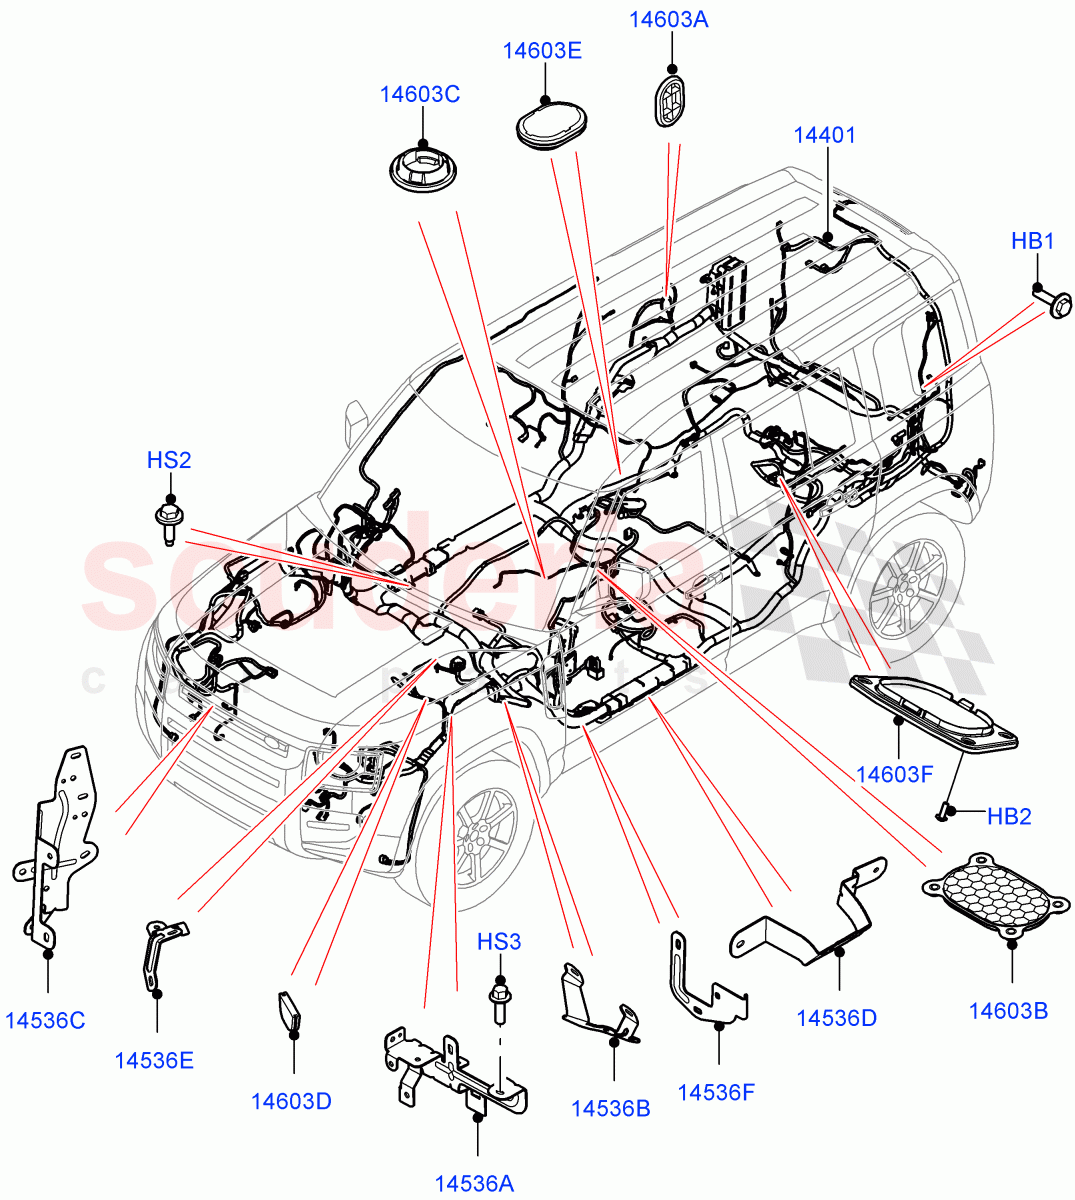 Electrical Wiring - Engine And Dash(Main Harness) of Land Rover Land Rover Defender (2020+) [3.0 I6 Turbo Diesel AJ20D6]